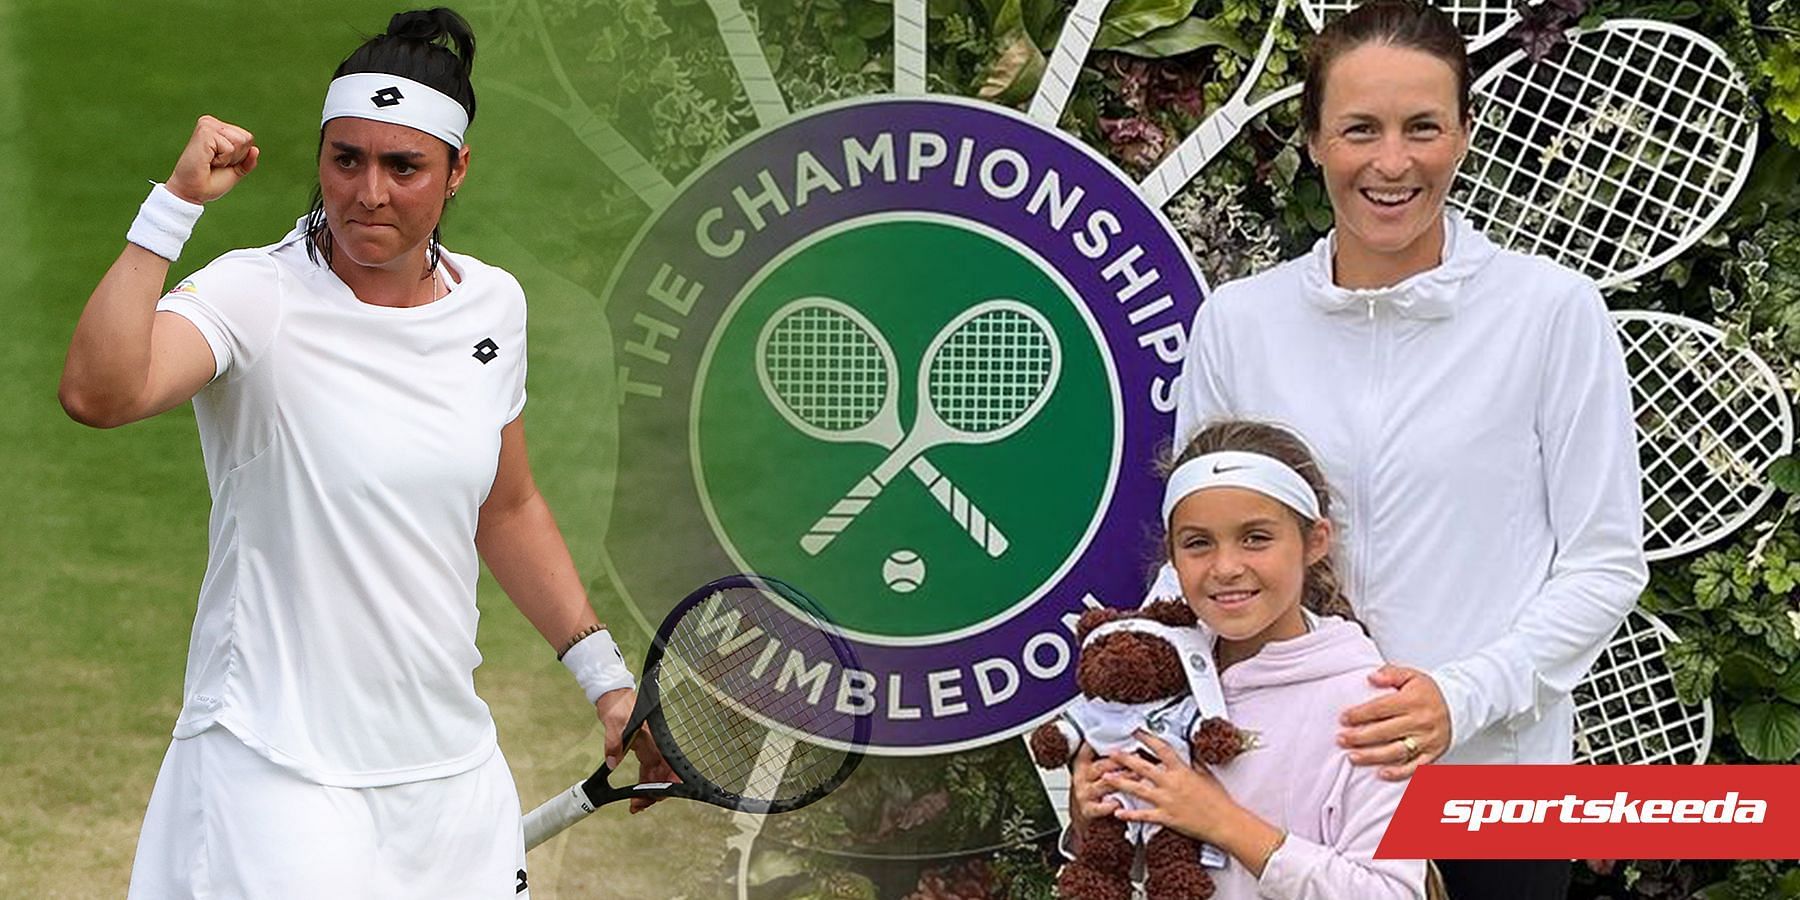 Ons Jabeur takes on Tatjana Maria in the semifinals of the 2022 Wimbledon Championships